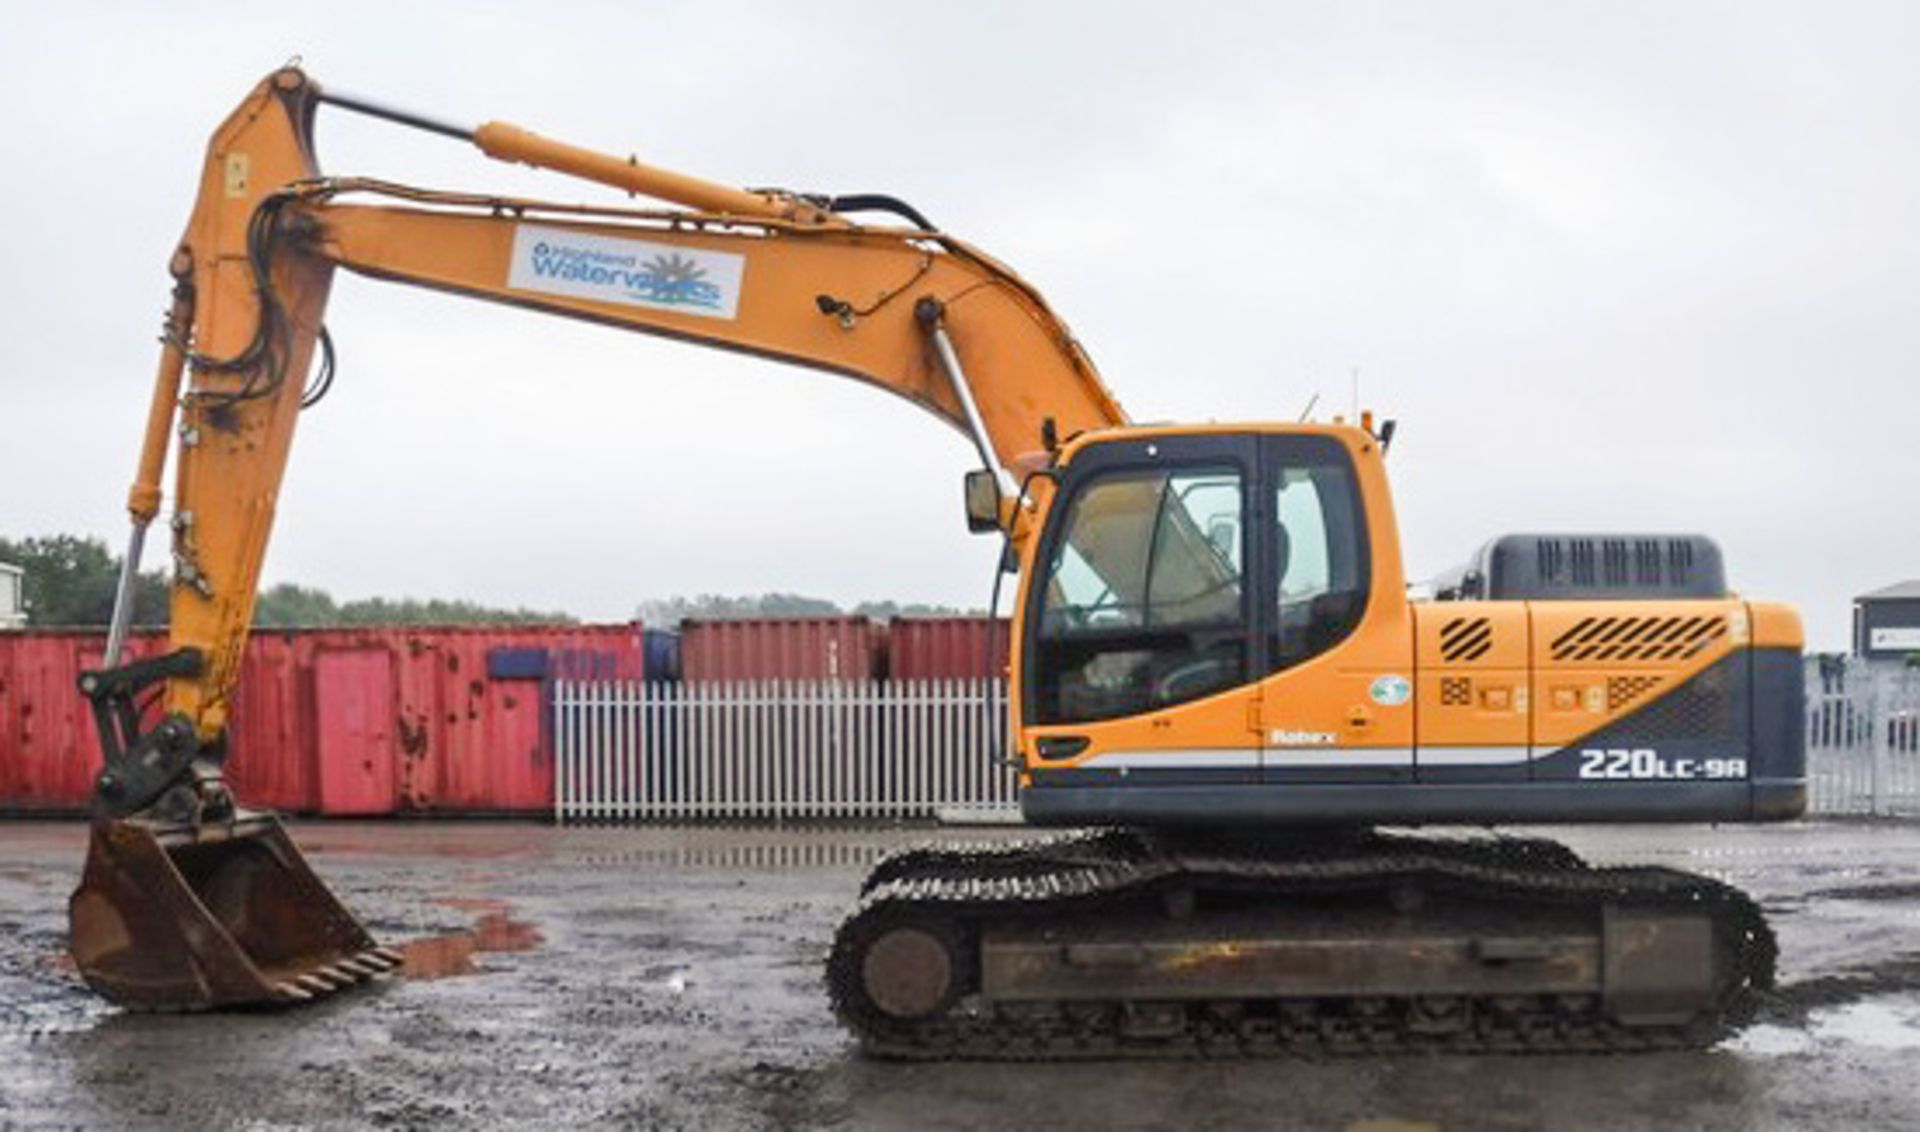 2014 HYUNDAI RC220 LC9A, S/N 359, 2340HRS (NOT VERIFIED), 1 BUCKET, MAX REACH 10M, HYD LINES FOR PIP - Image 16 of 17